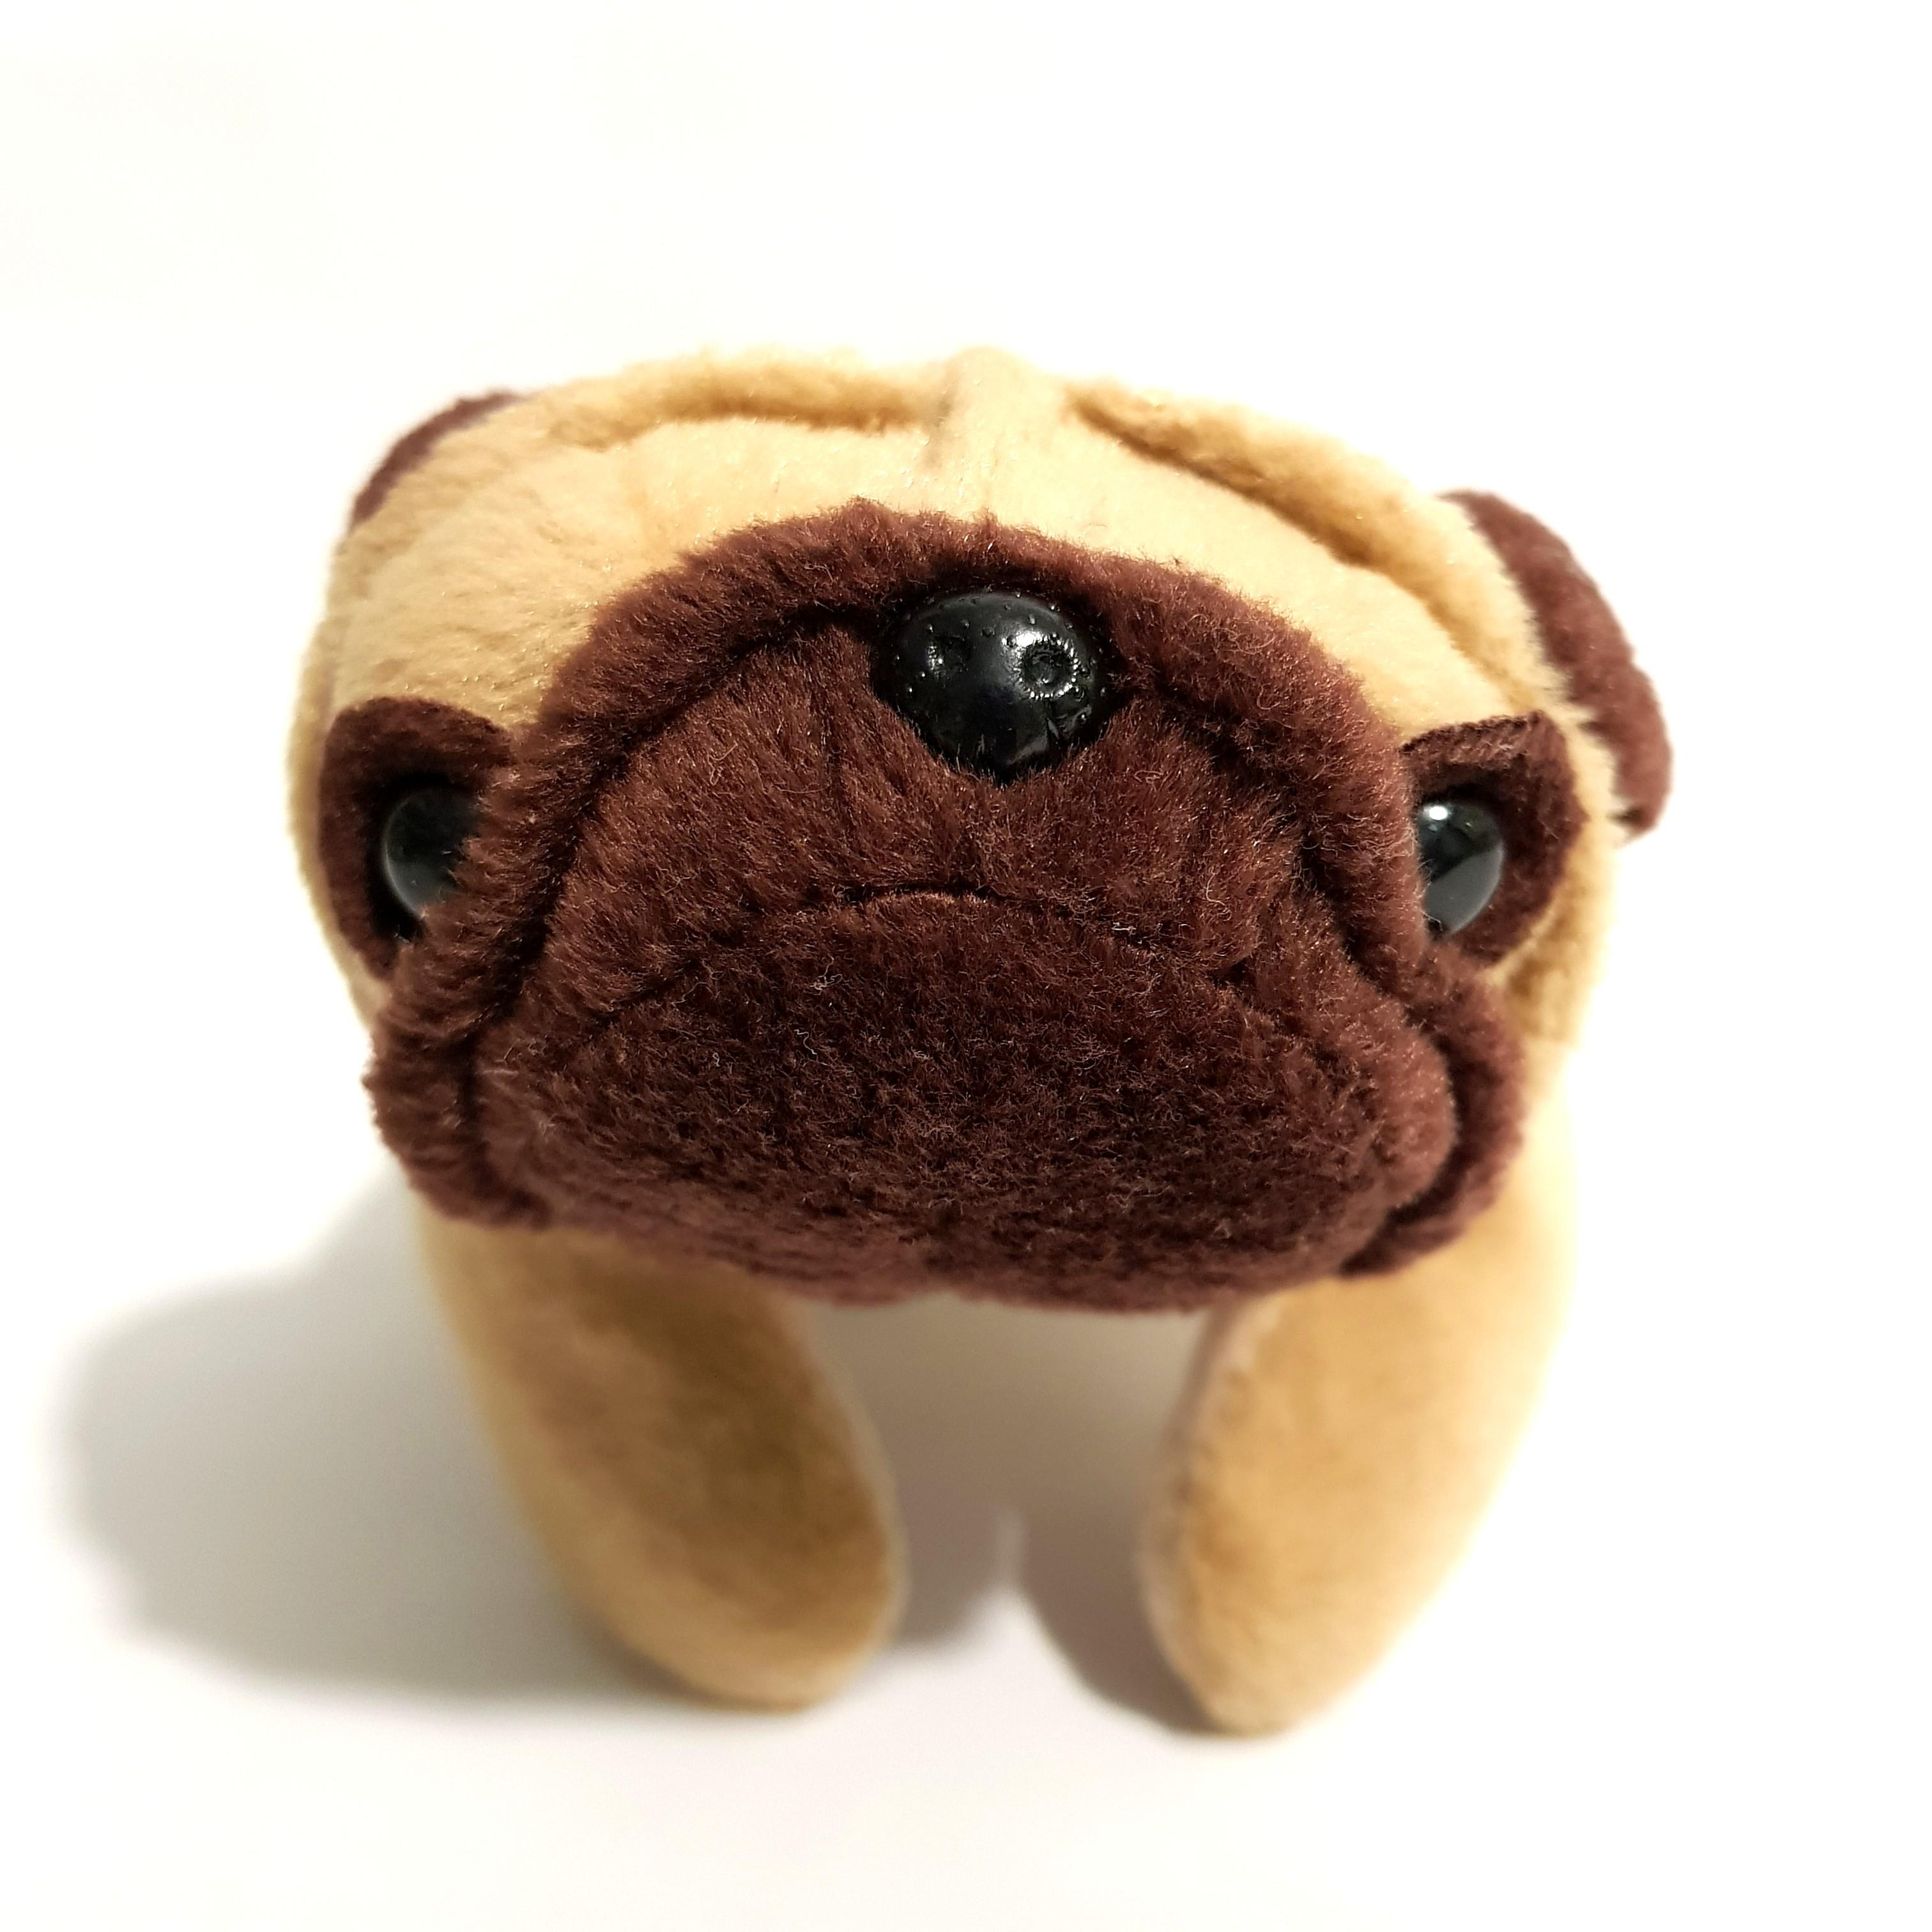 Vintage Plush Beanie Baby Pug Dog Pugsly With Tags 1996   Some Fading on Tags